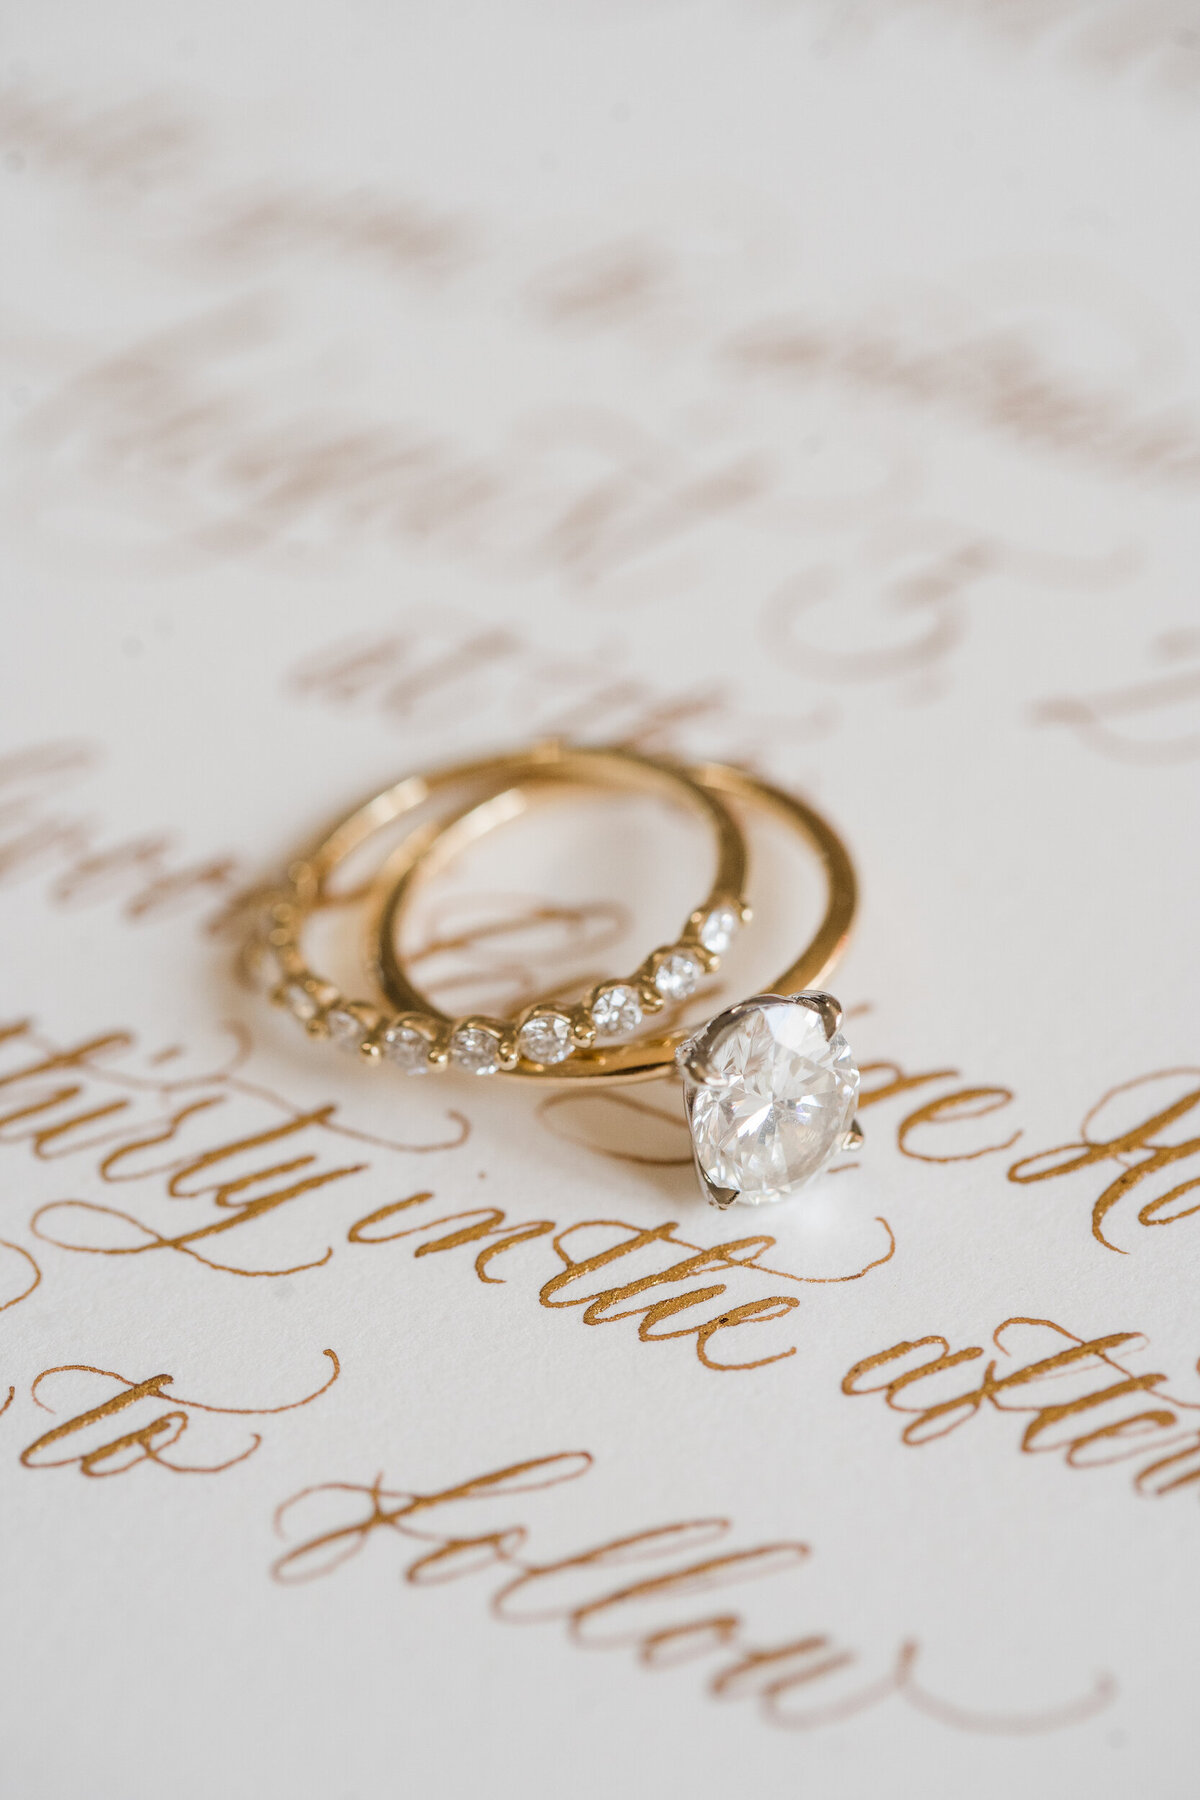 A gold wedding band and engagement ring sitting on gold calligraphy invitation for a Greensboro , NC wedding.